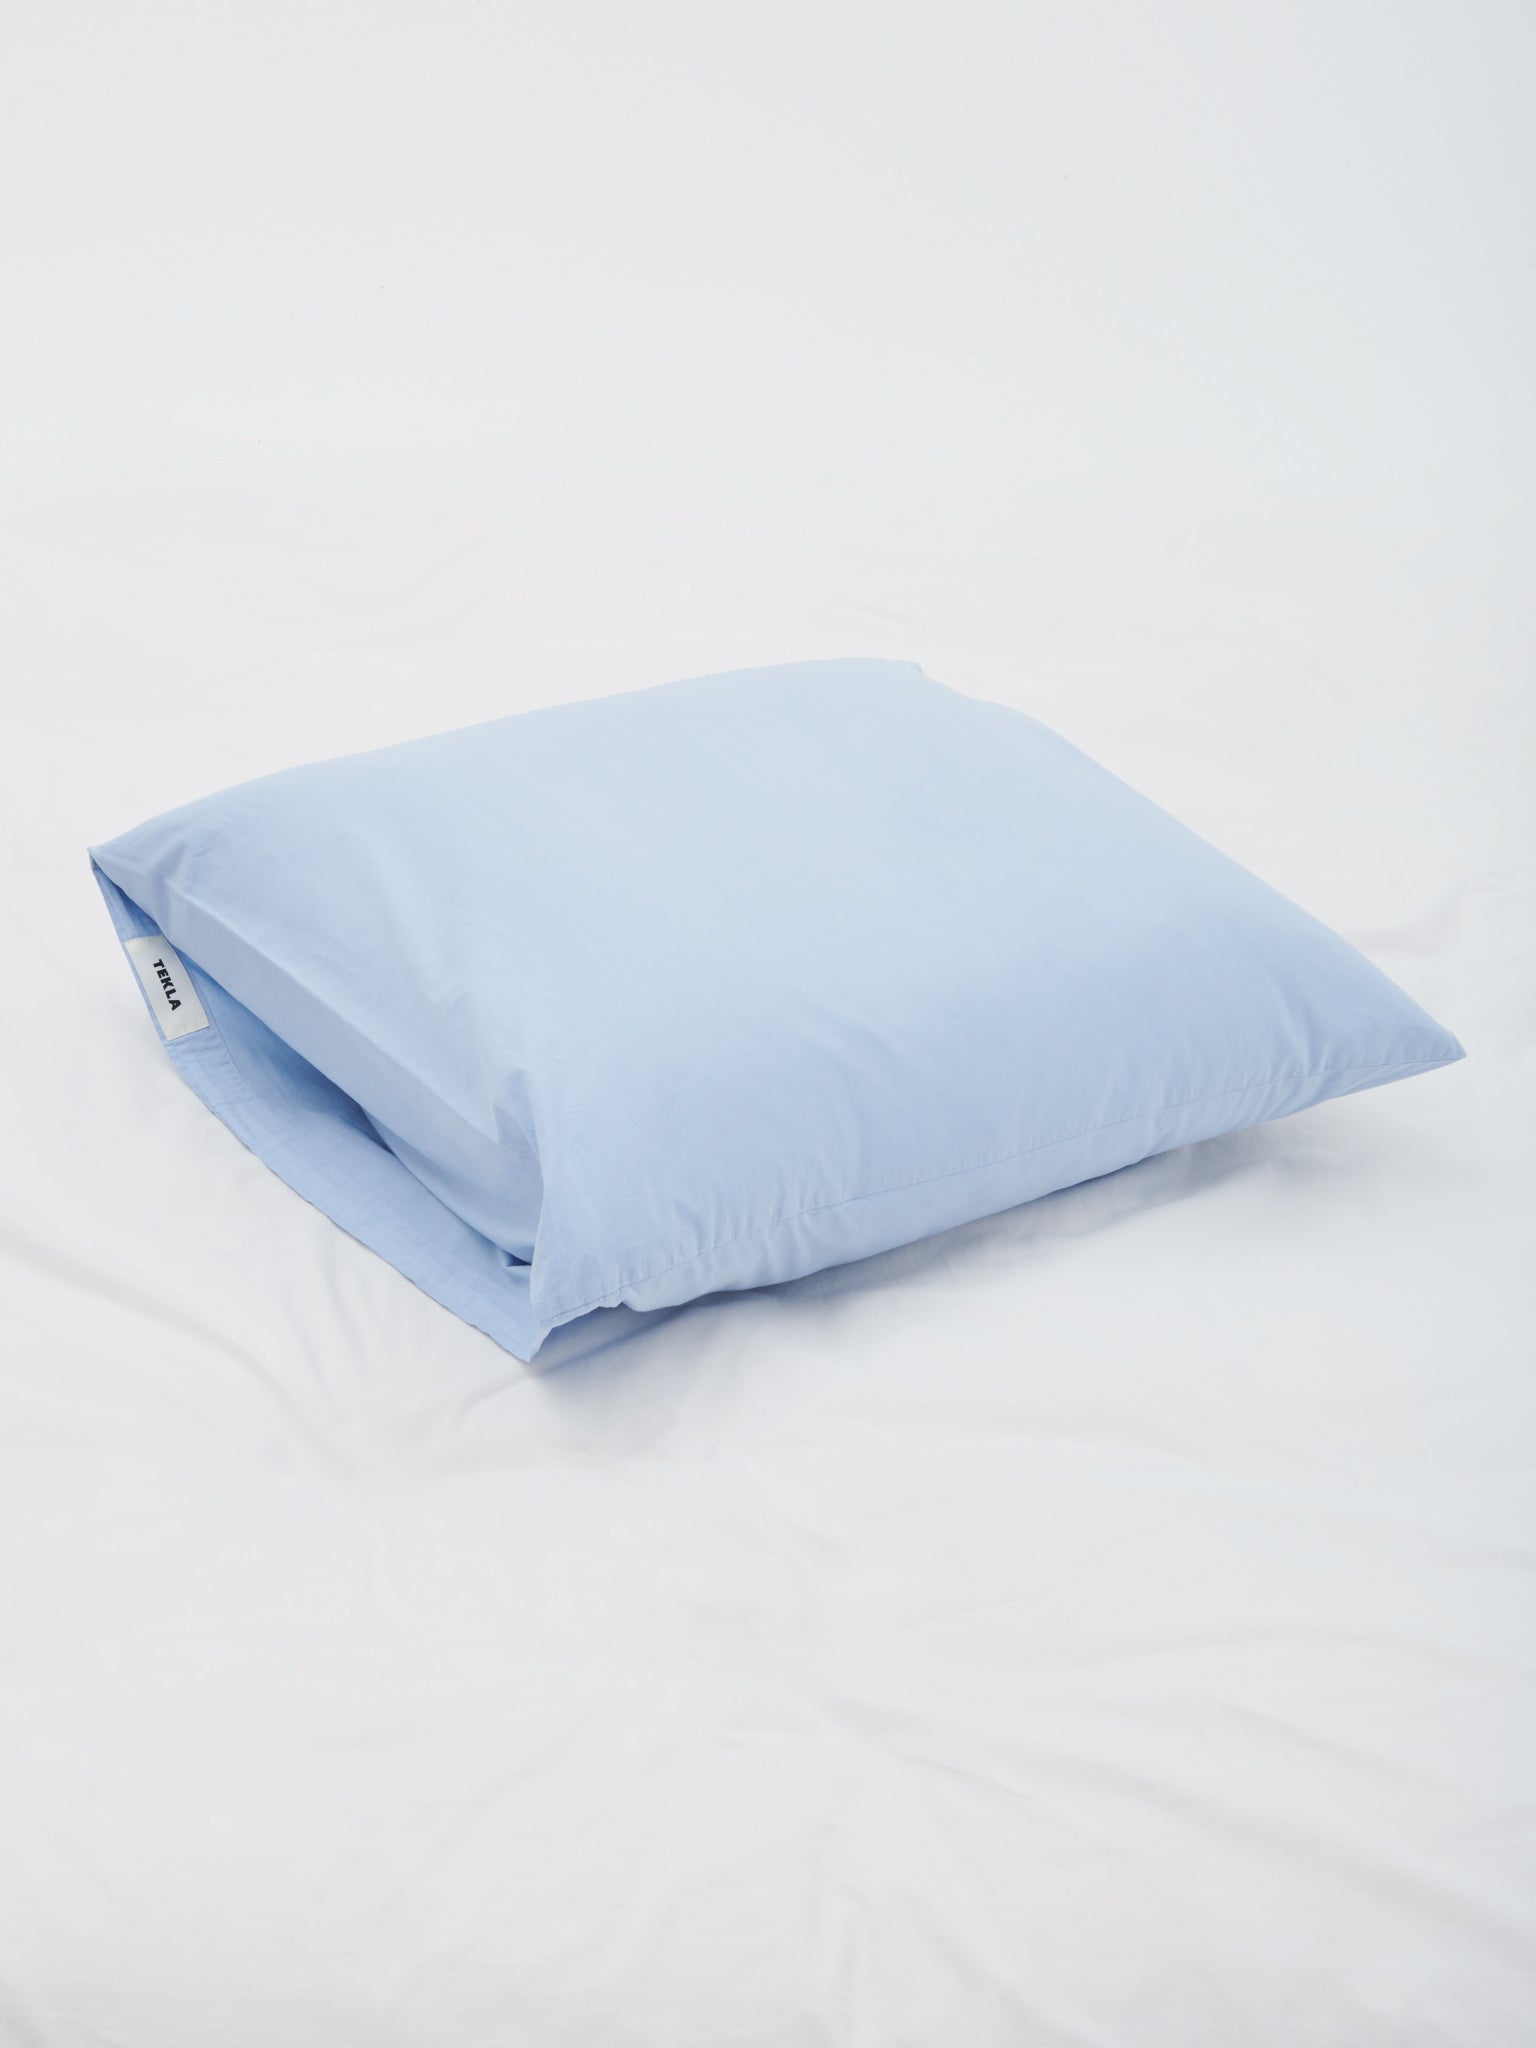 Percale Pillow Sham in Morning Blue